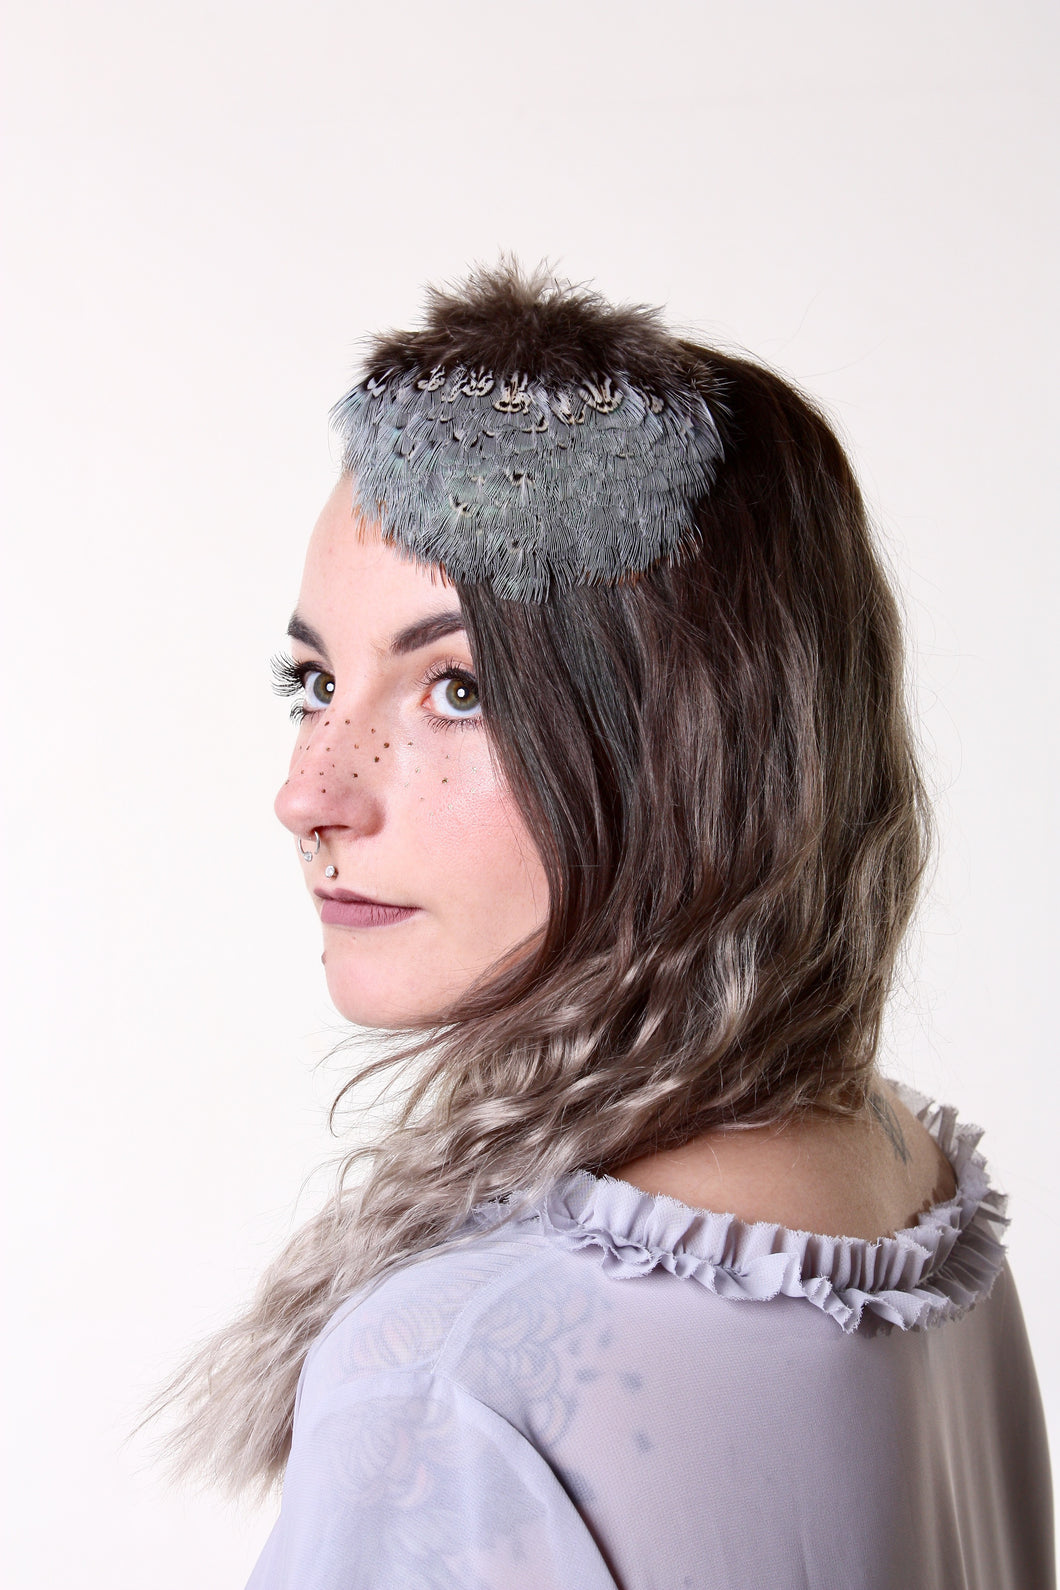 In Full Plume Soft grey and turquoise feathered headpiece, fascinator or statement hair accessory